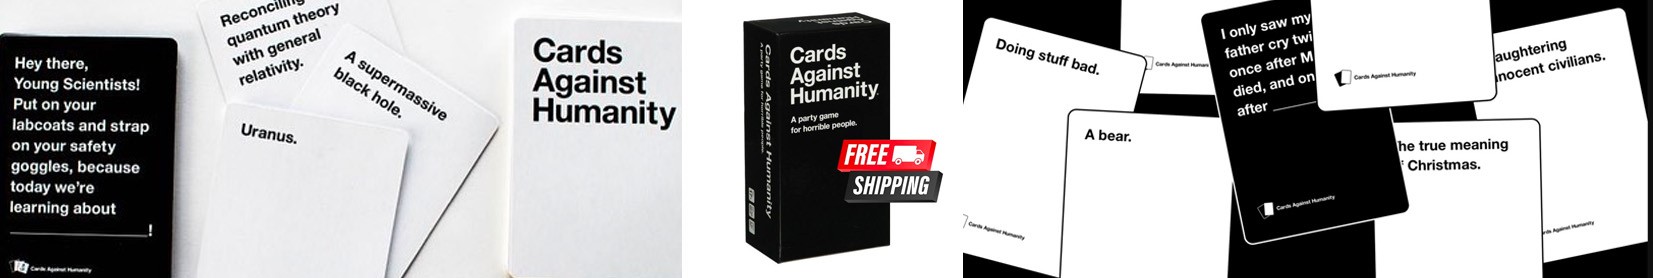 Cards against humanity banner